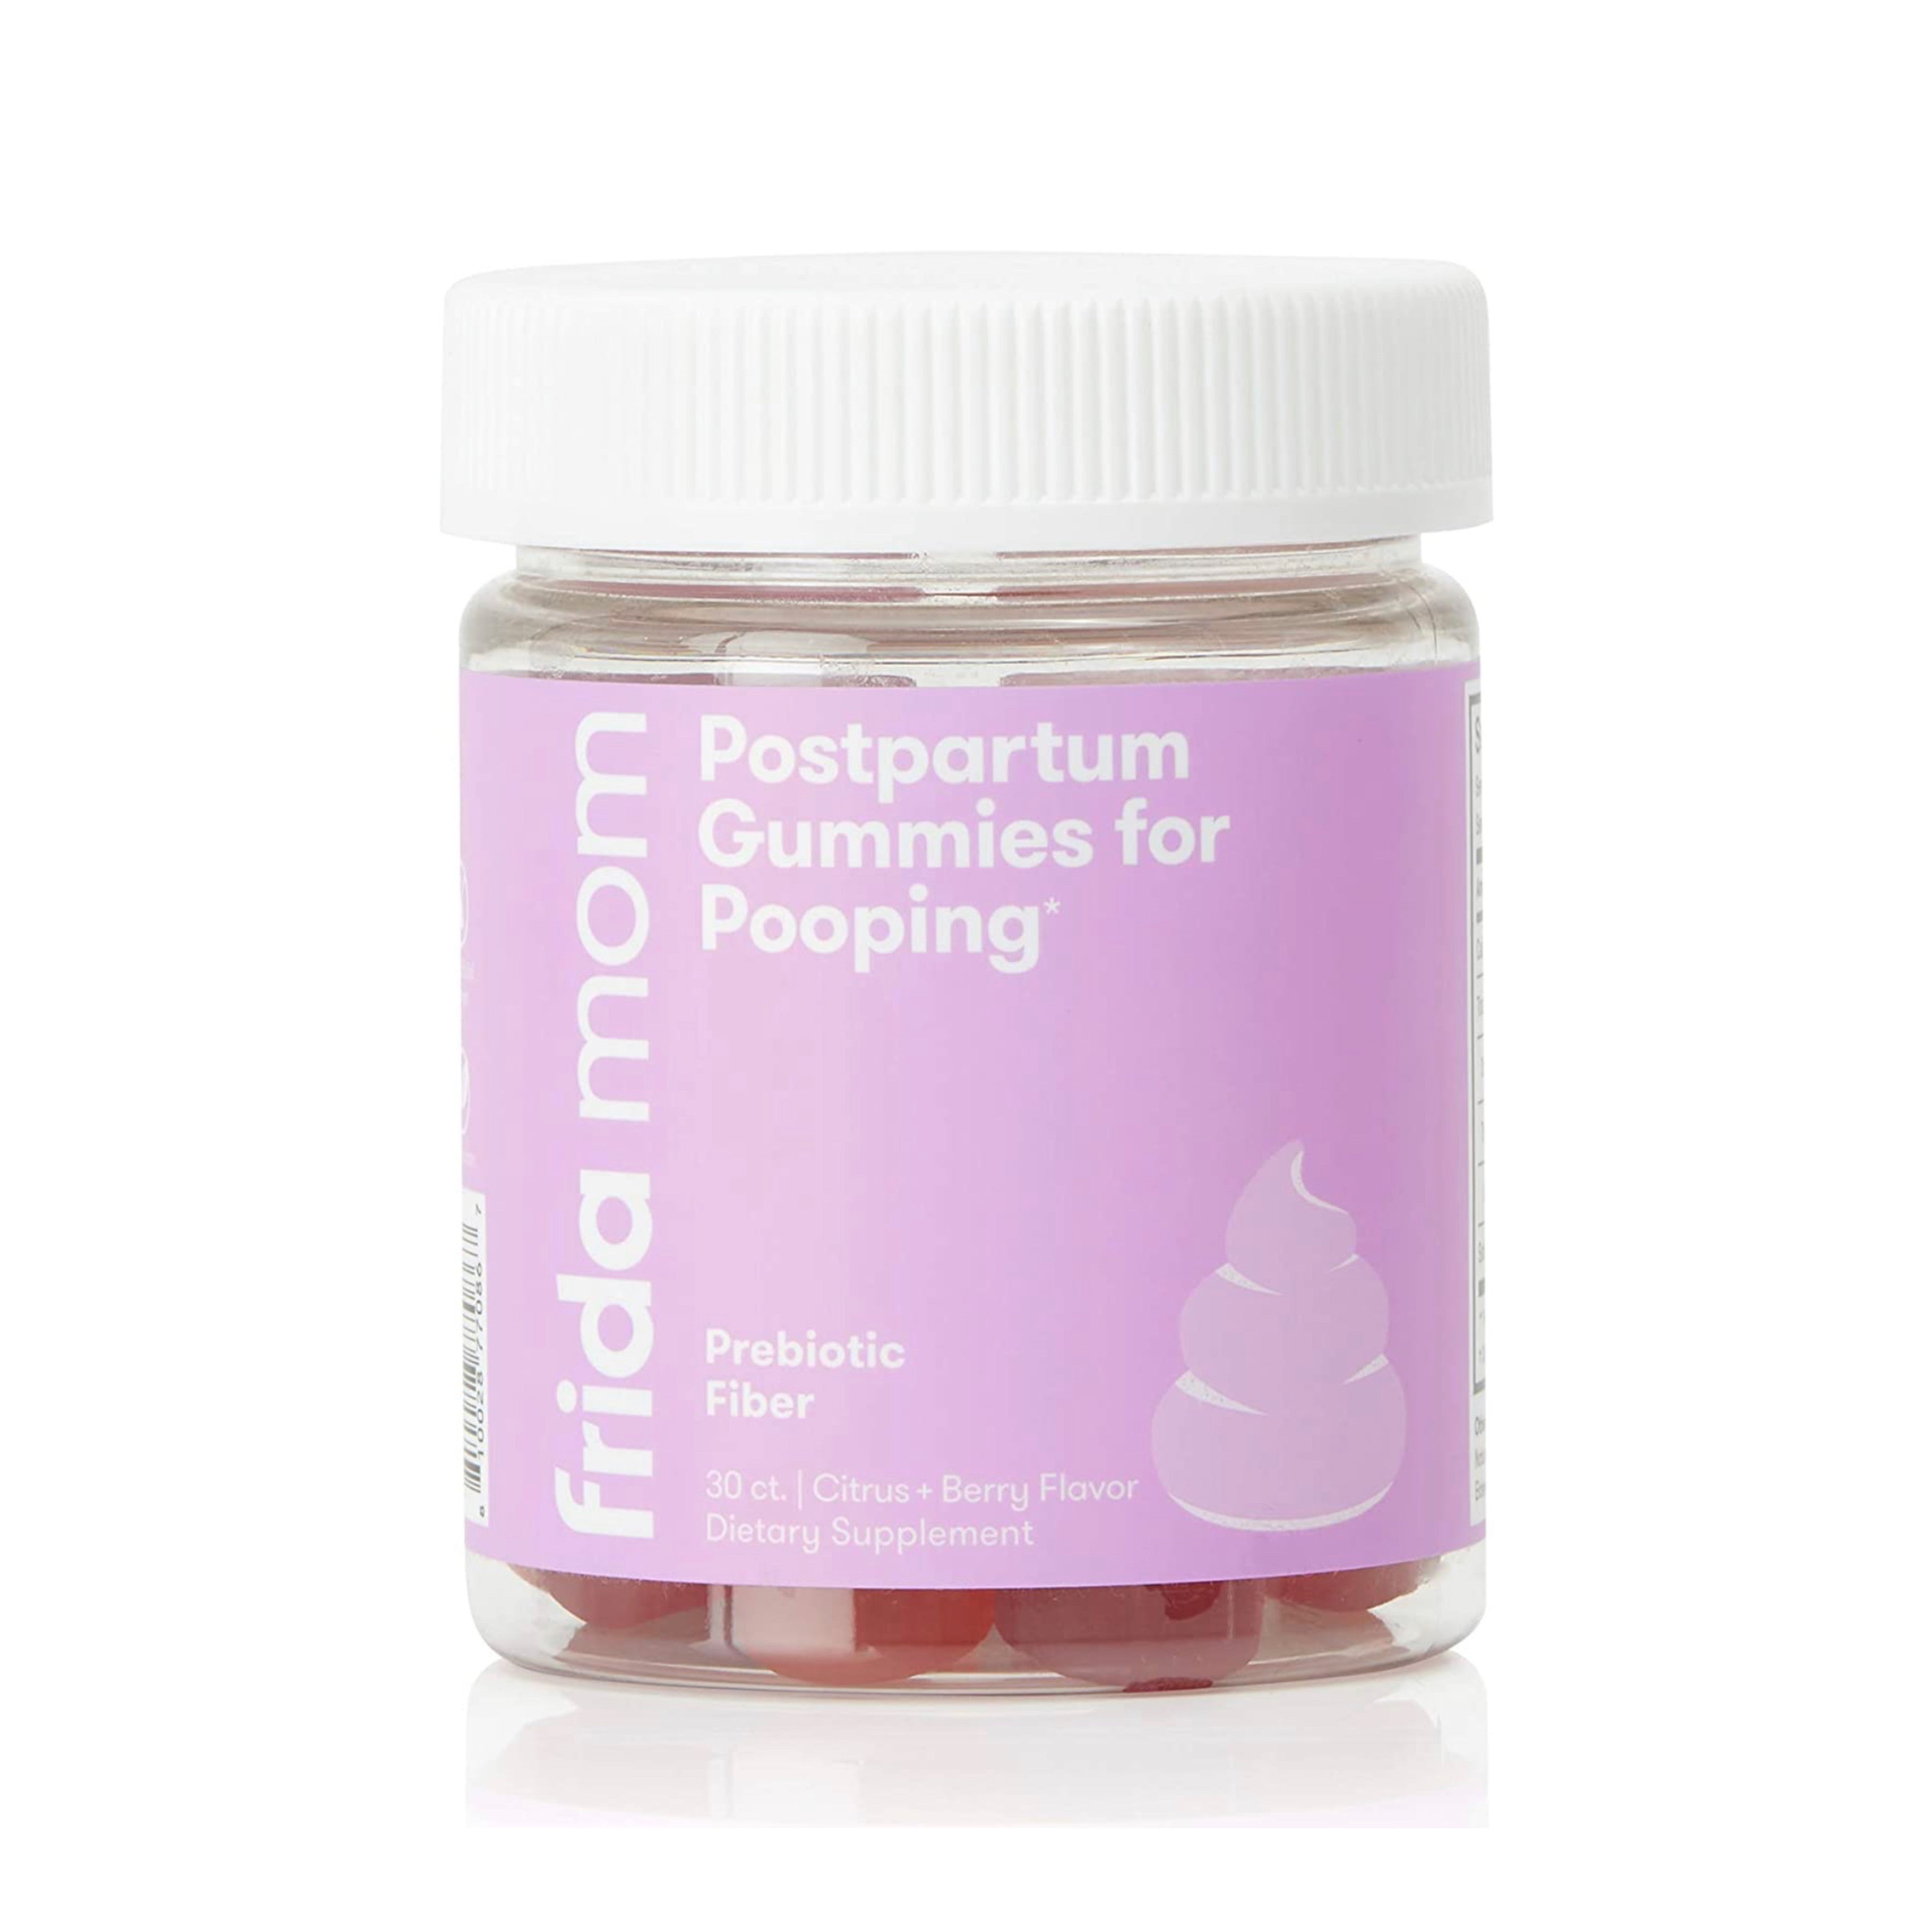 Postpartum Gummies for Pooping (30 Count).